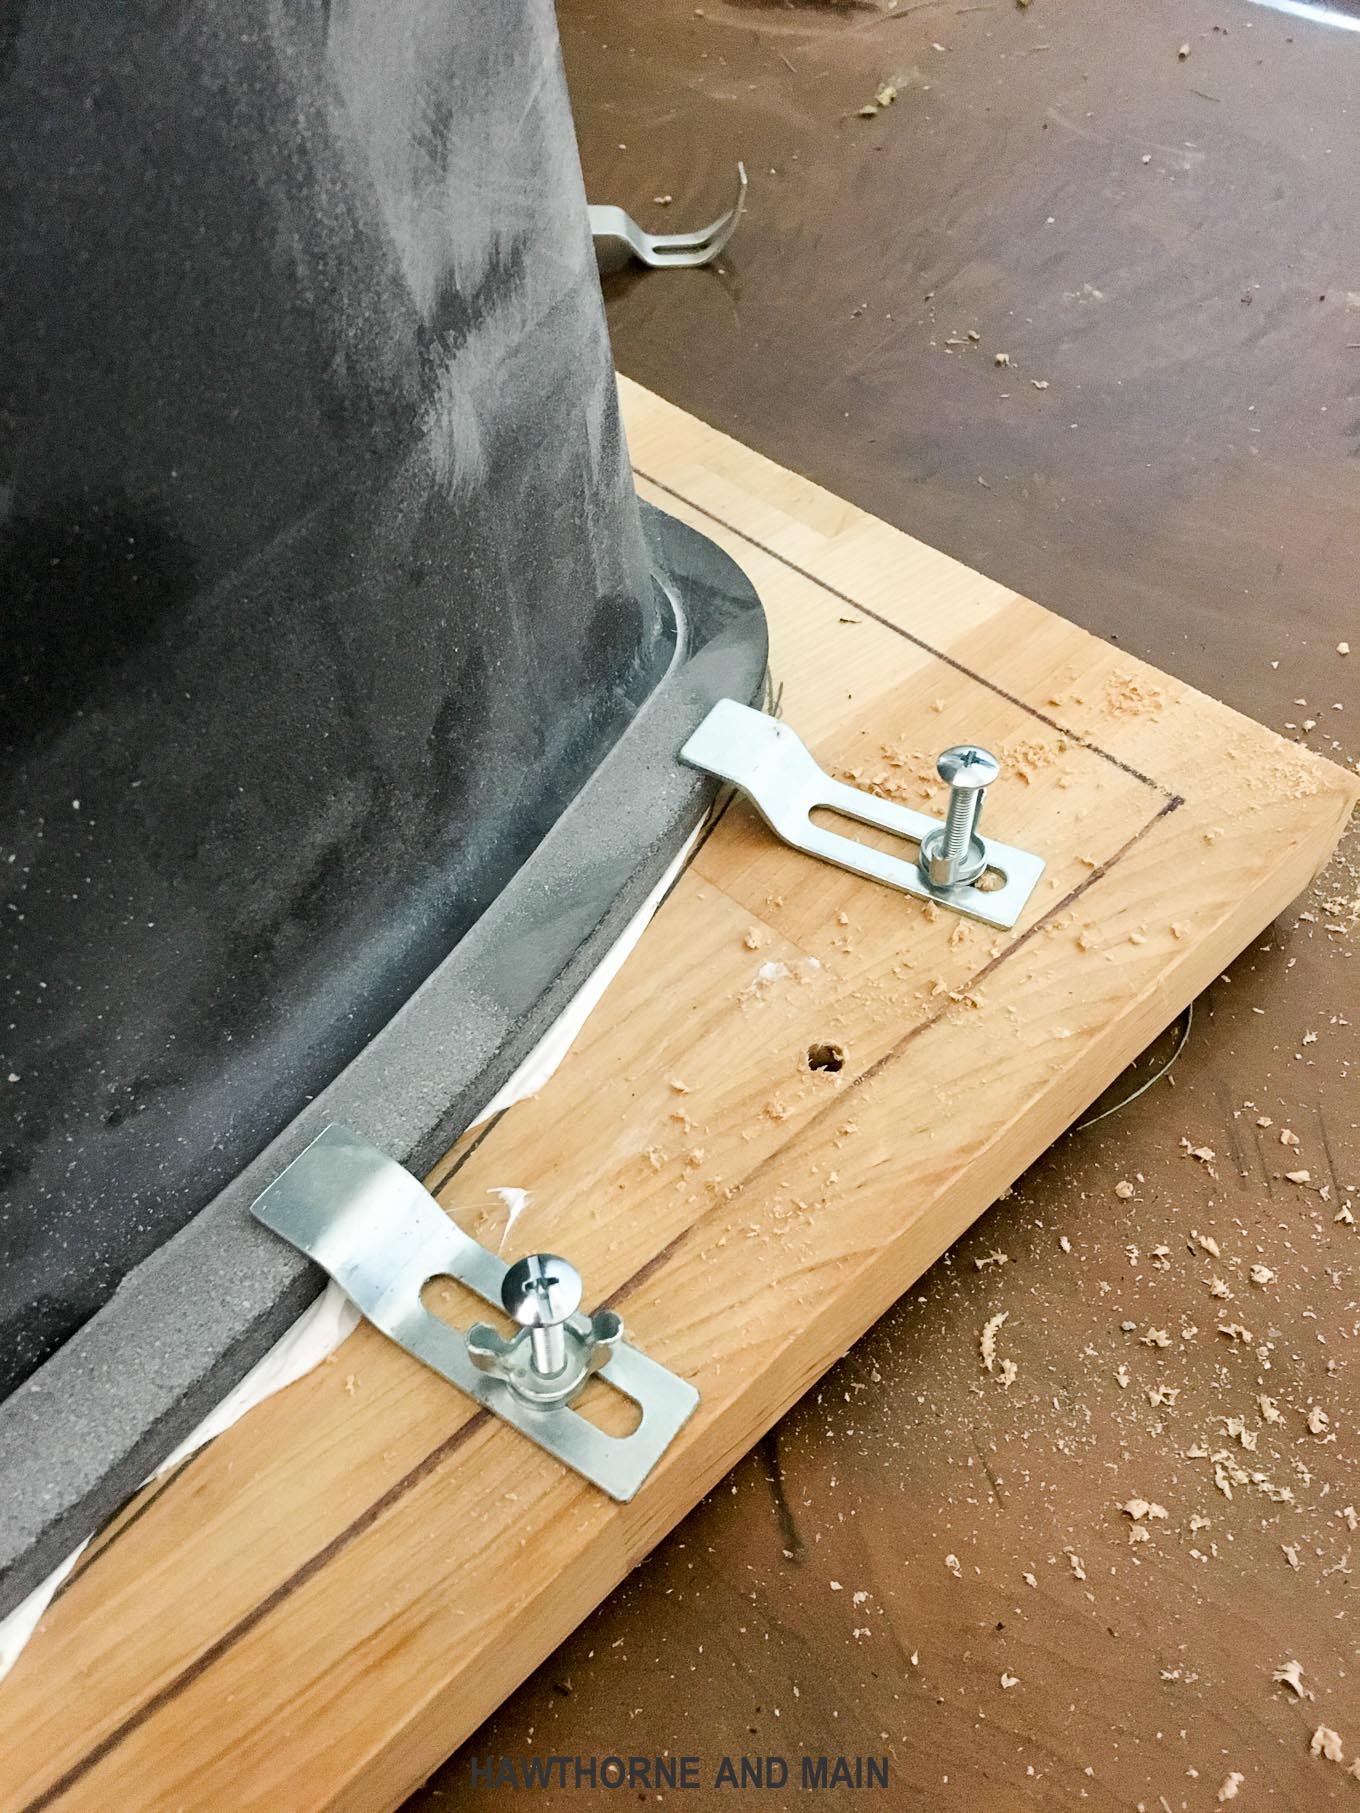 How to install an undermount sink...and learning when to DIY and when to get help